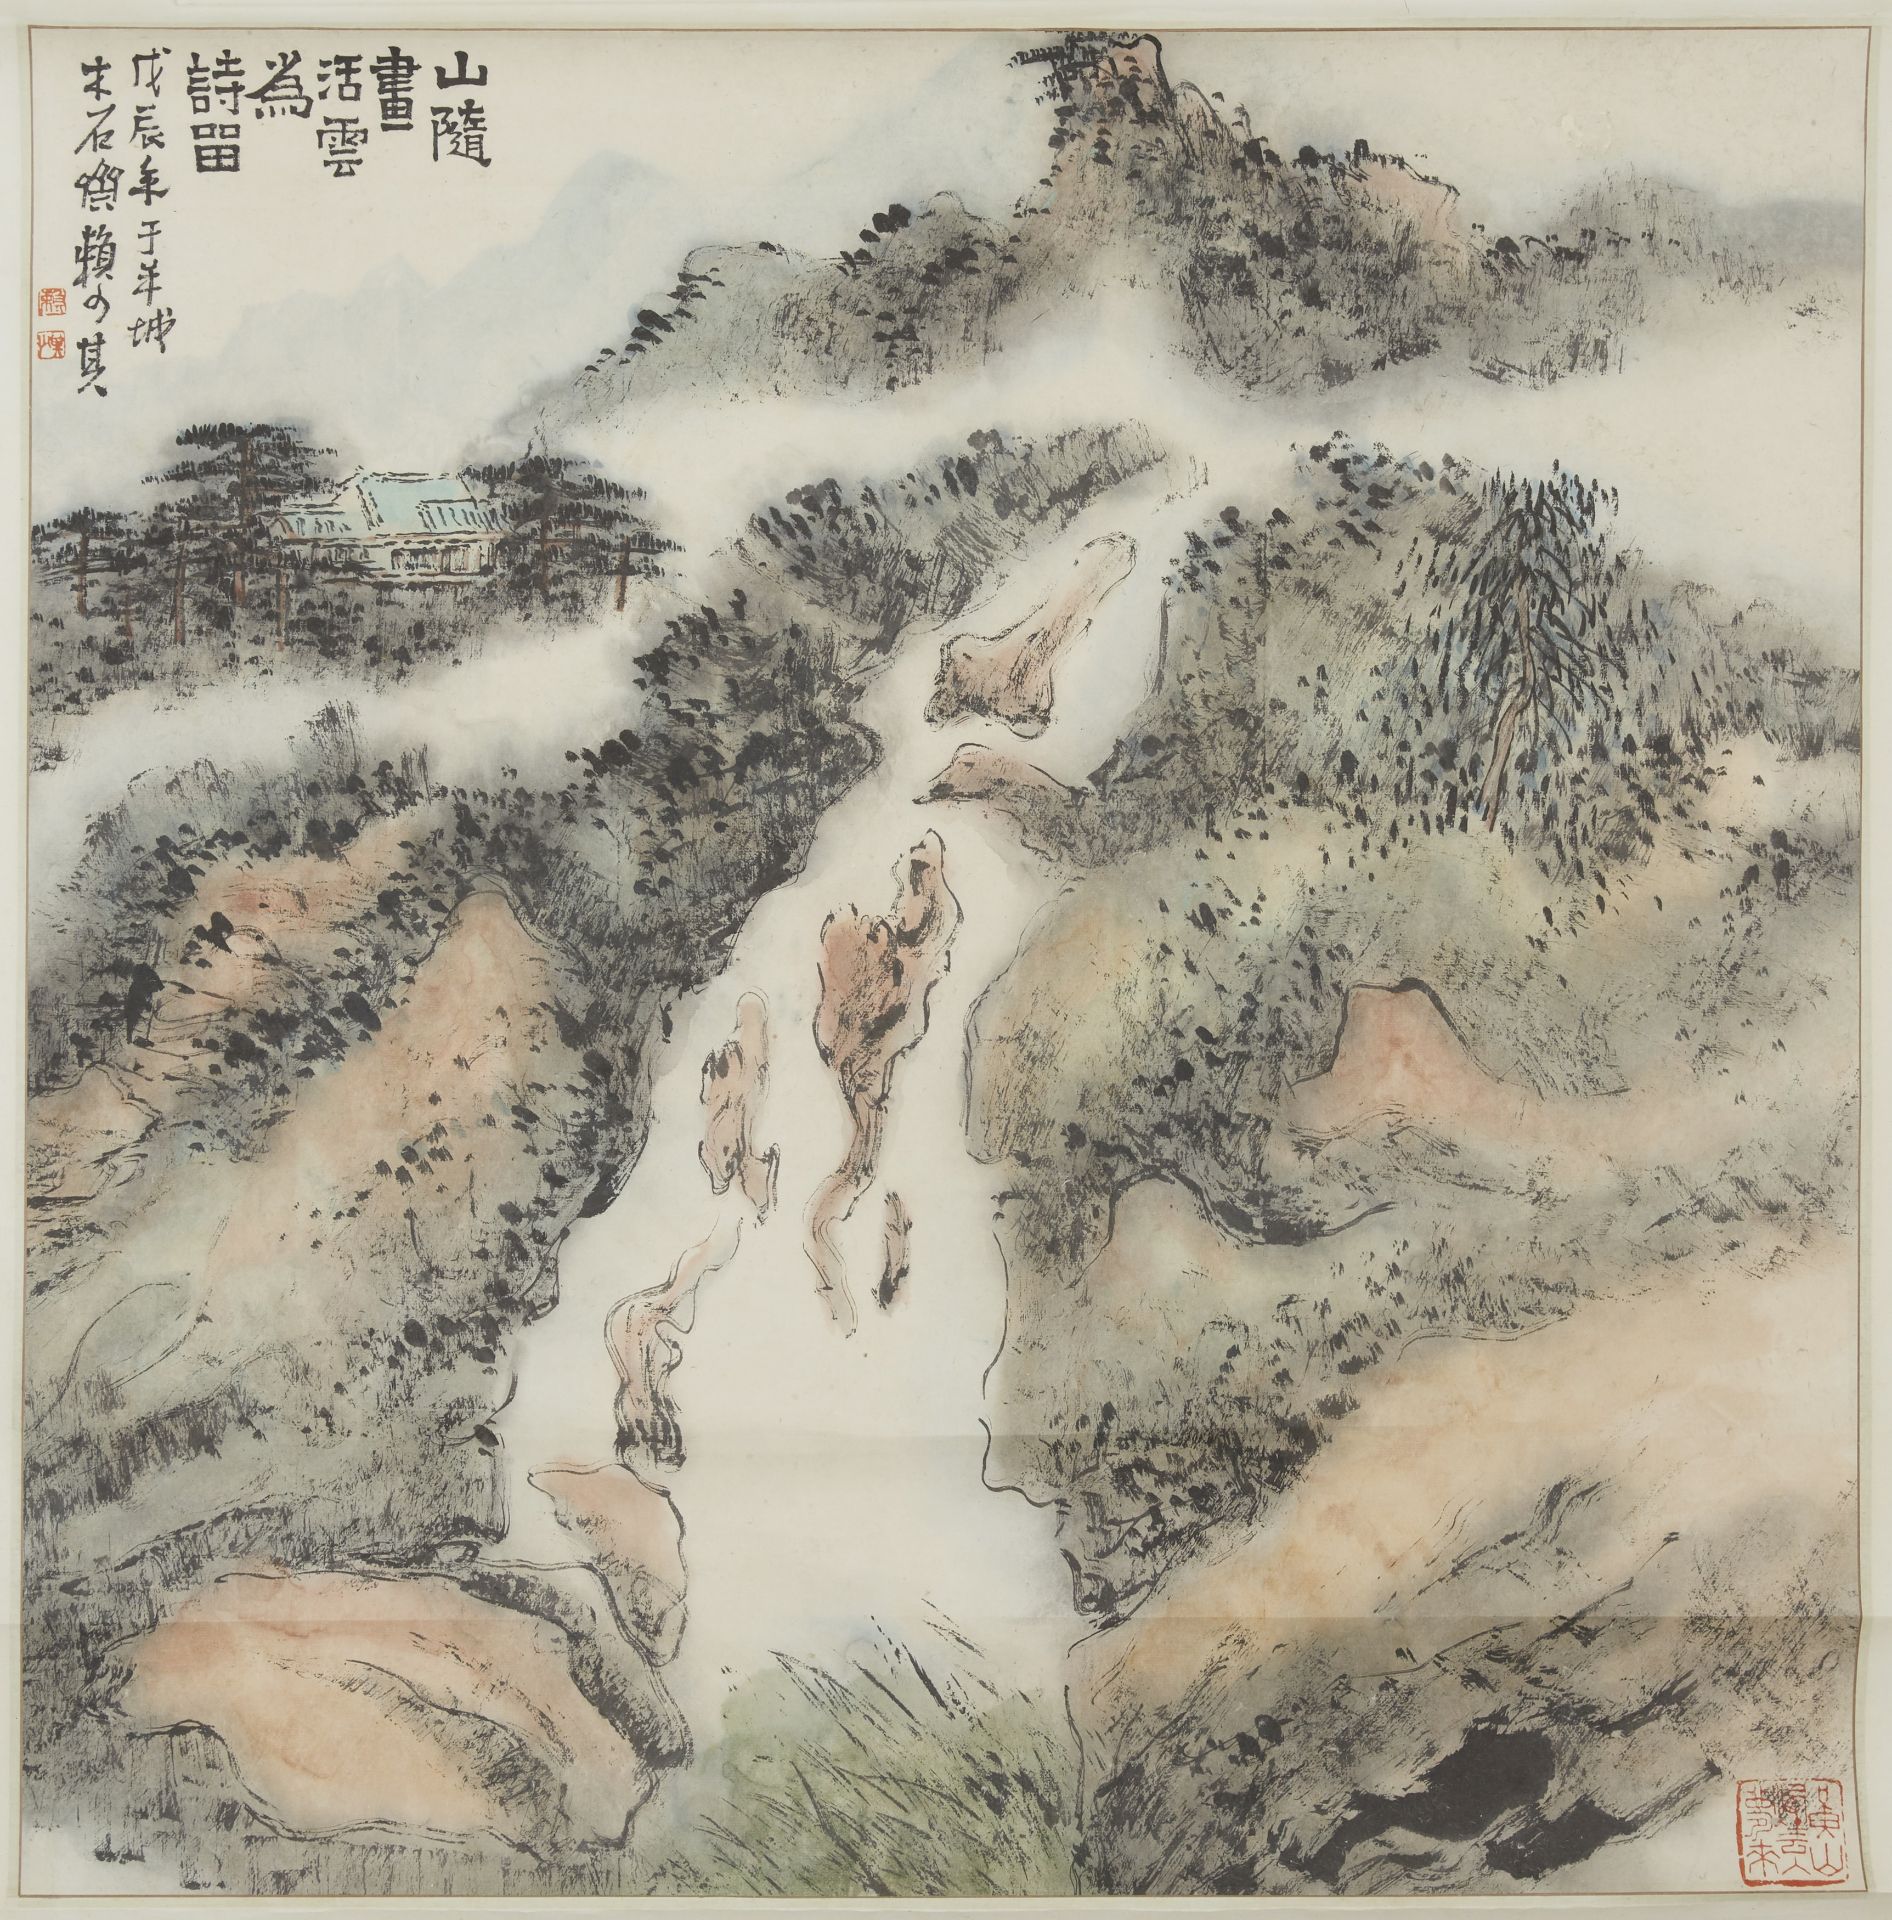 INK SCROLL PAINTING WITH LANDSCAPE DATED TO 1988AD